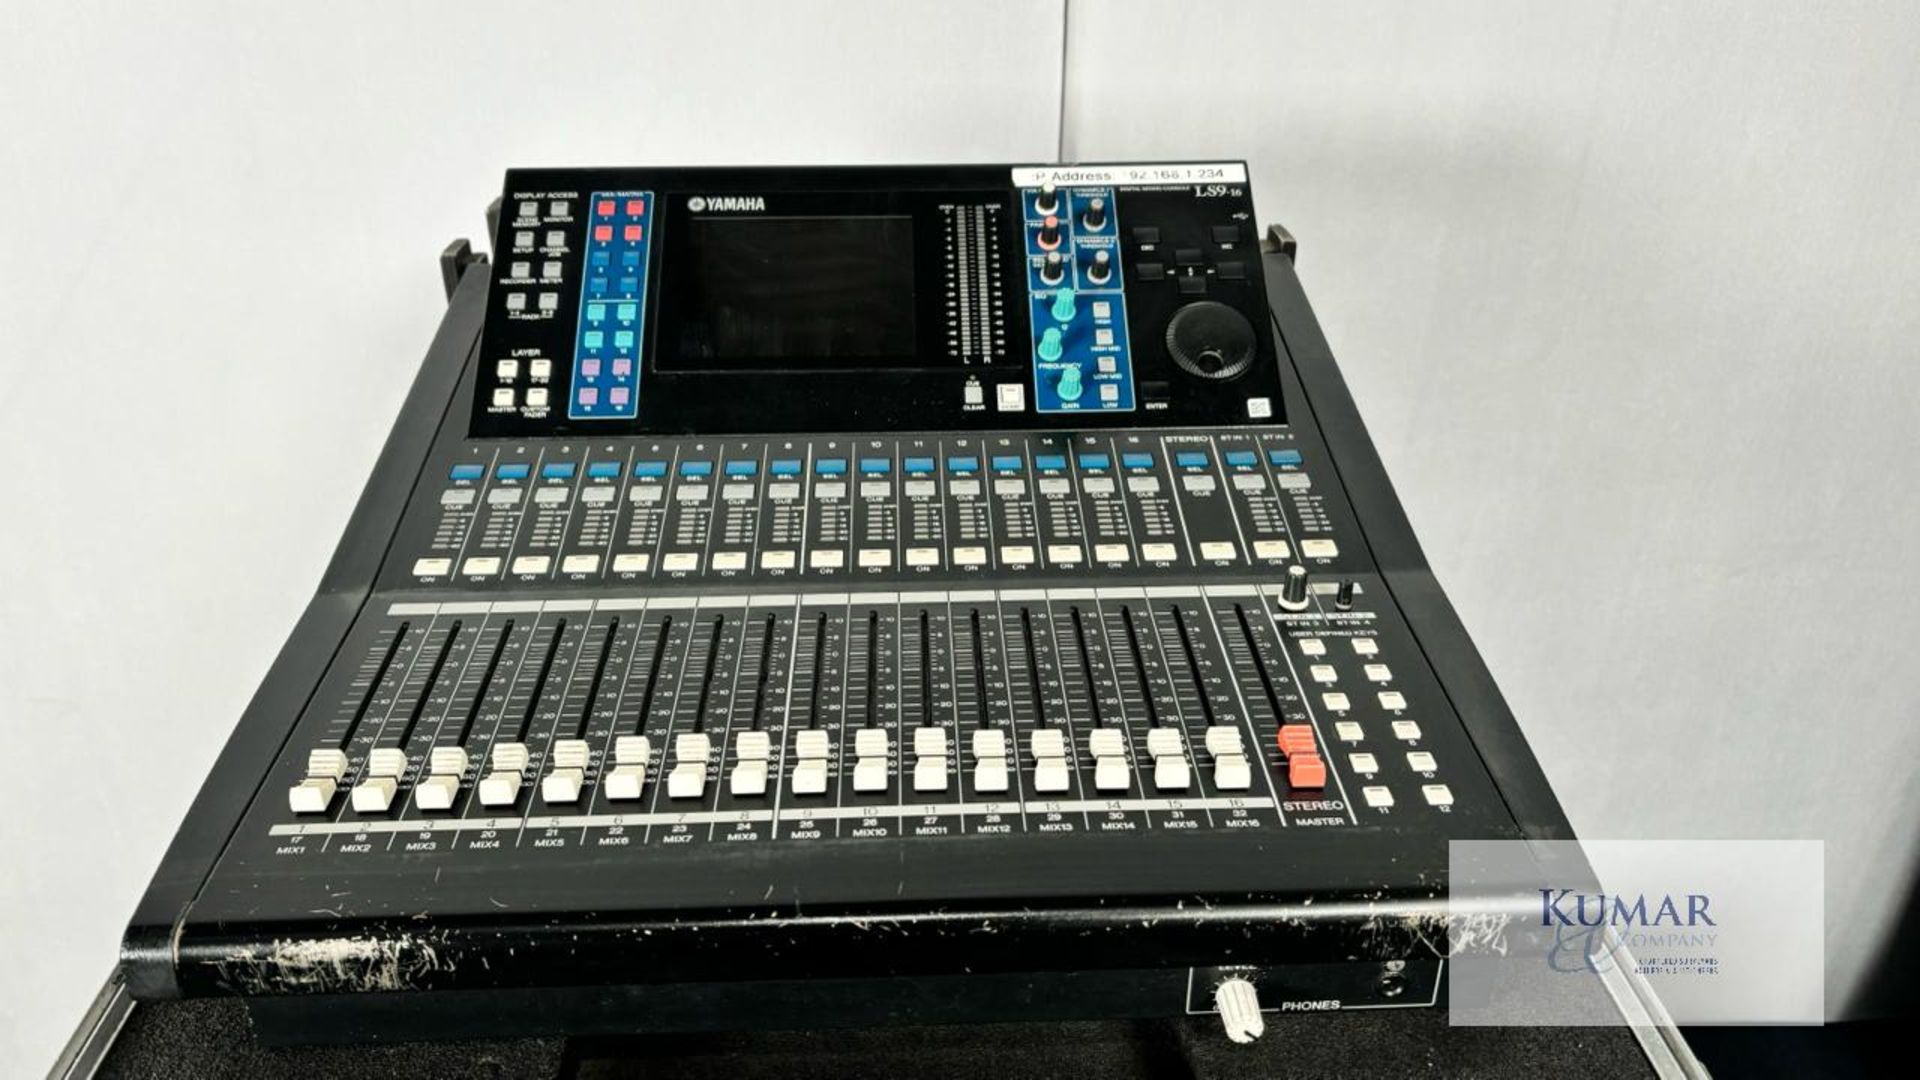 Yamaha LS9 16 Channel Digital Mixing Console in Flight Case Yamaha LS9-16 - Good working order. - Image 2 of 5